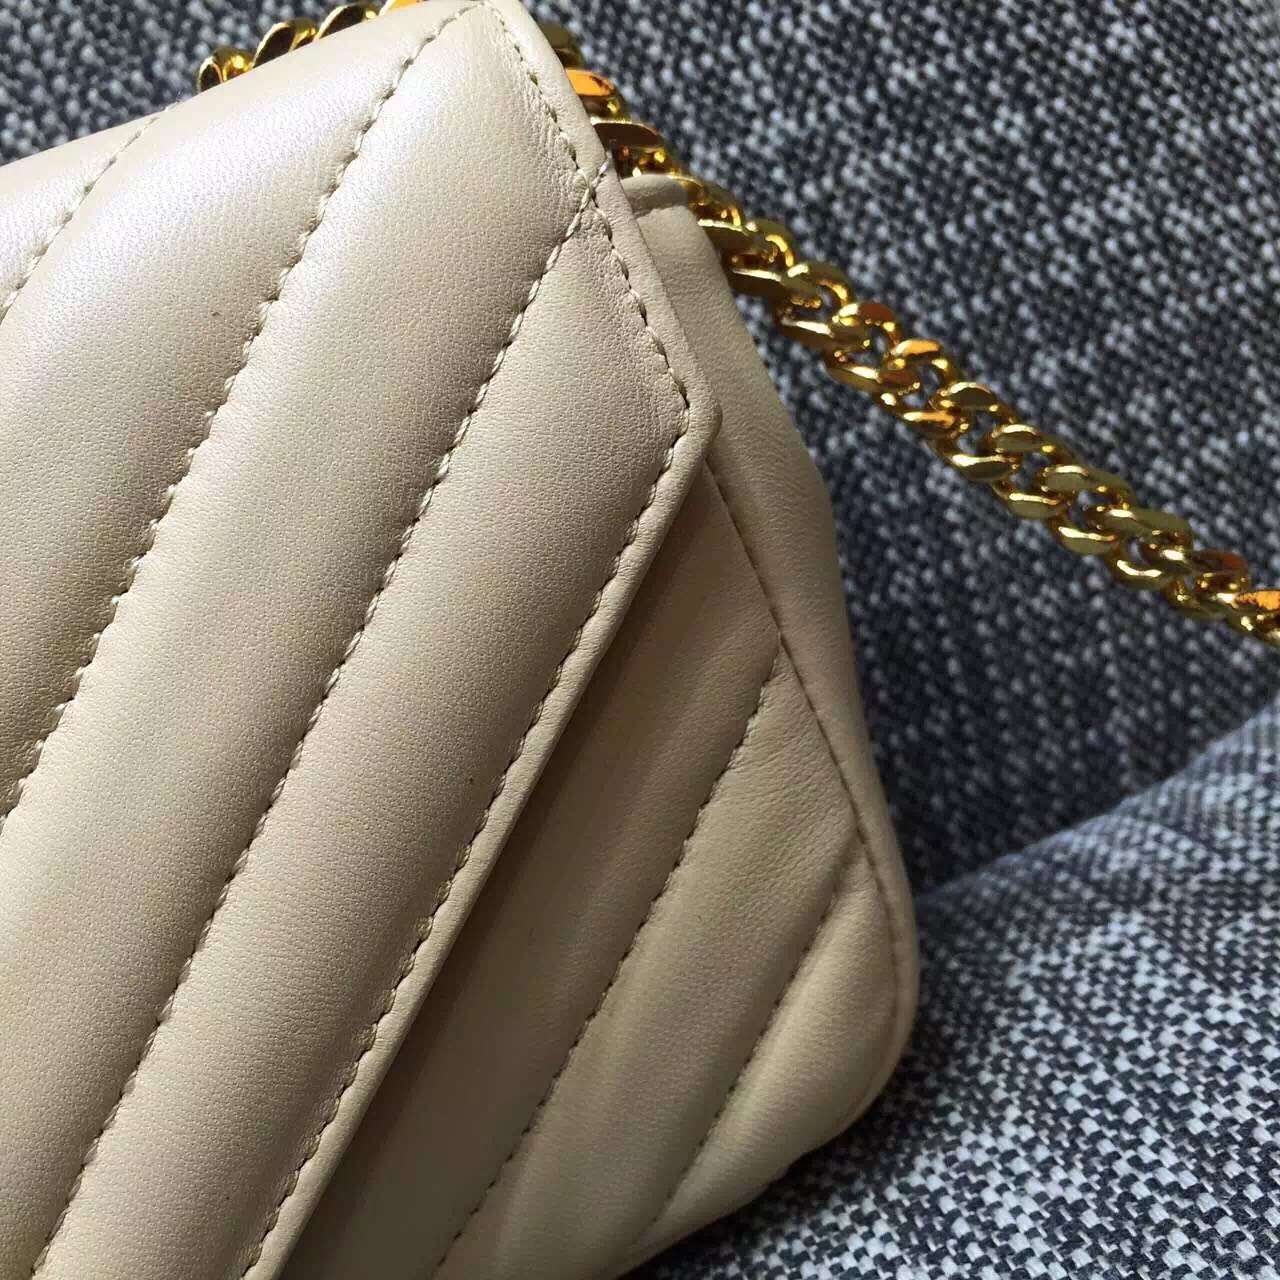 2015 Cheap YSL Out Sale with Free Shipping-Saint Laurent Classic Baby Monogram Satchel in Off-white Matelasse Leather with Gold Hardware - Click Image to Close